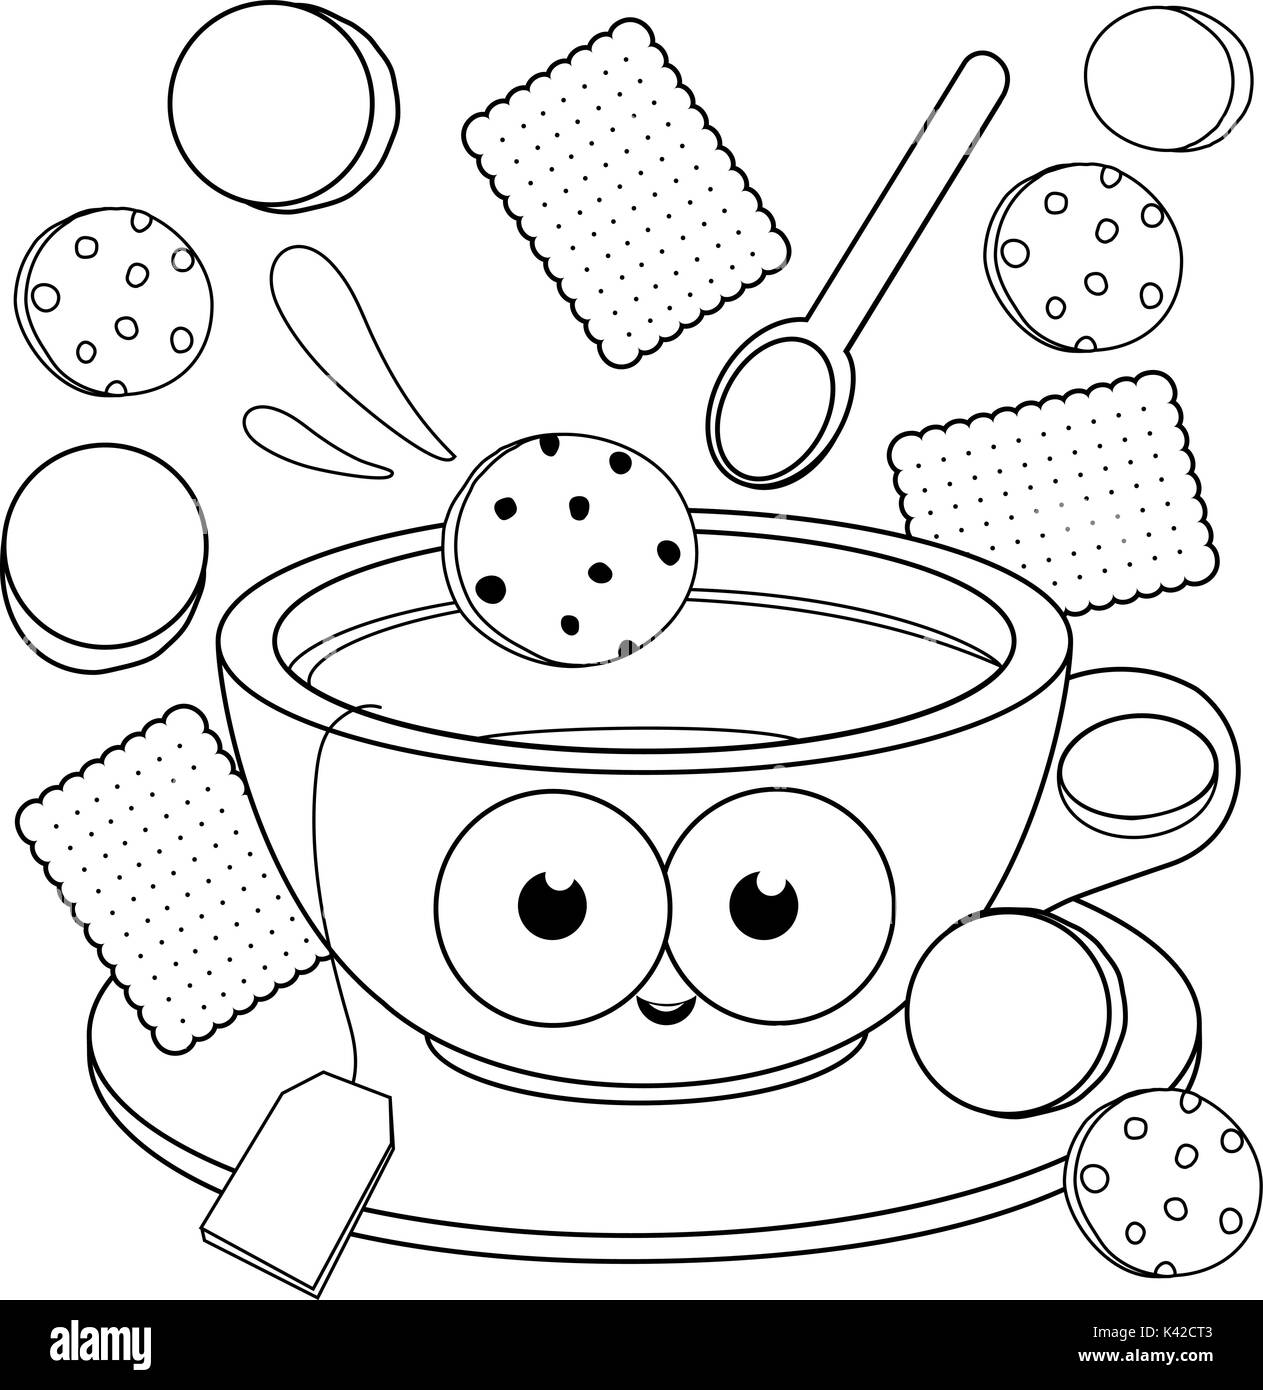 Cup of Tea and cookies. Coloring book page Stock Vector